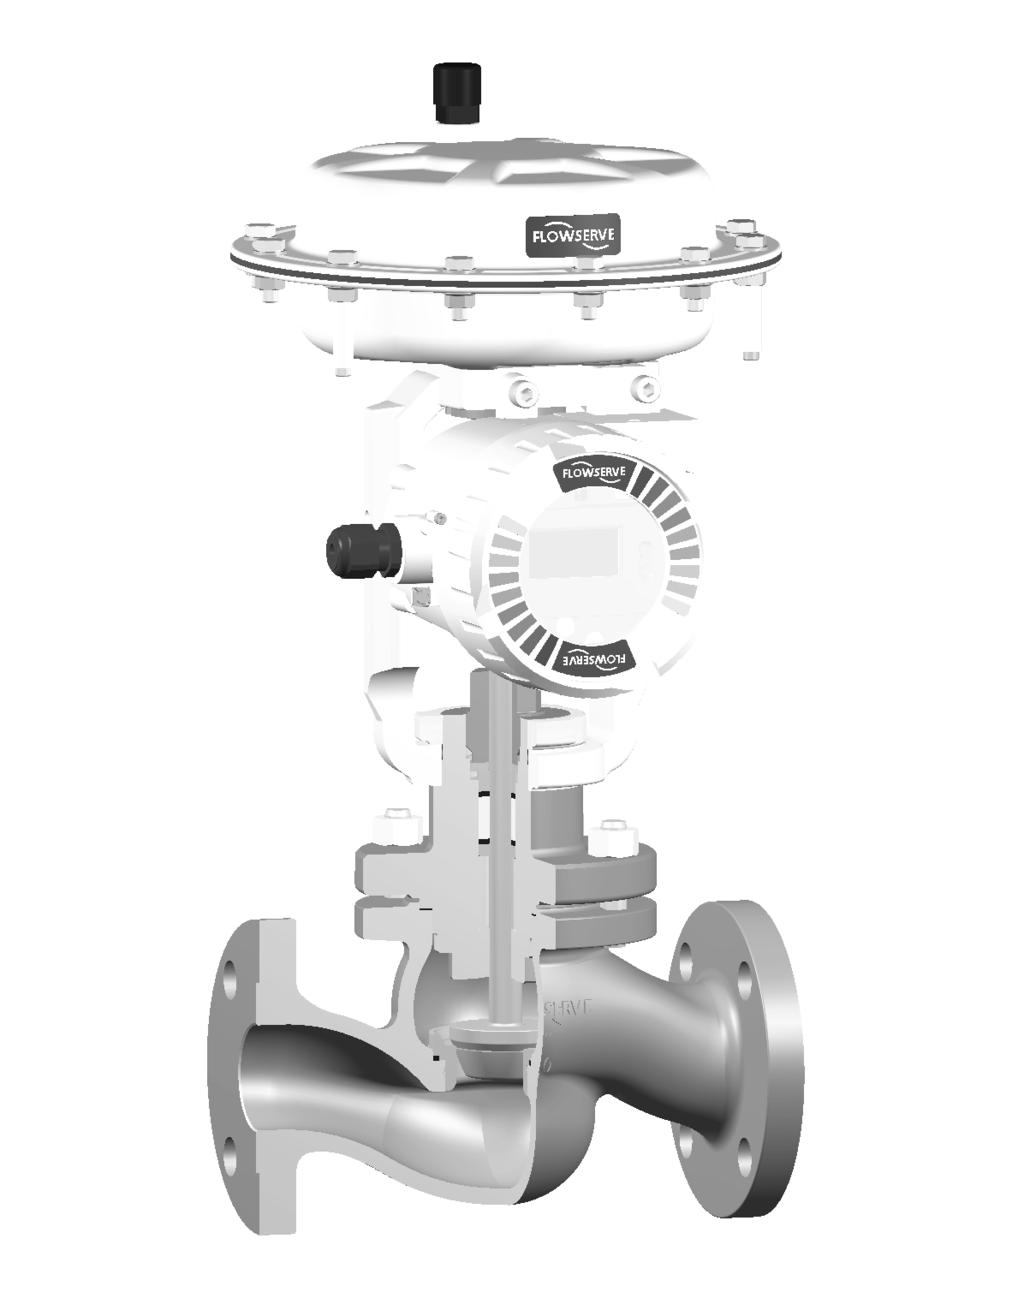 Valtek GS - General Service Control Valve The Valtek GS product line is low cost, compact and light-weight.